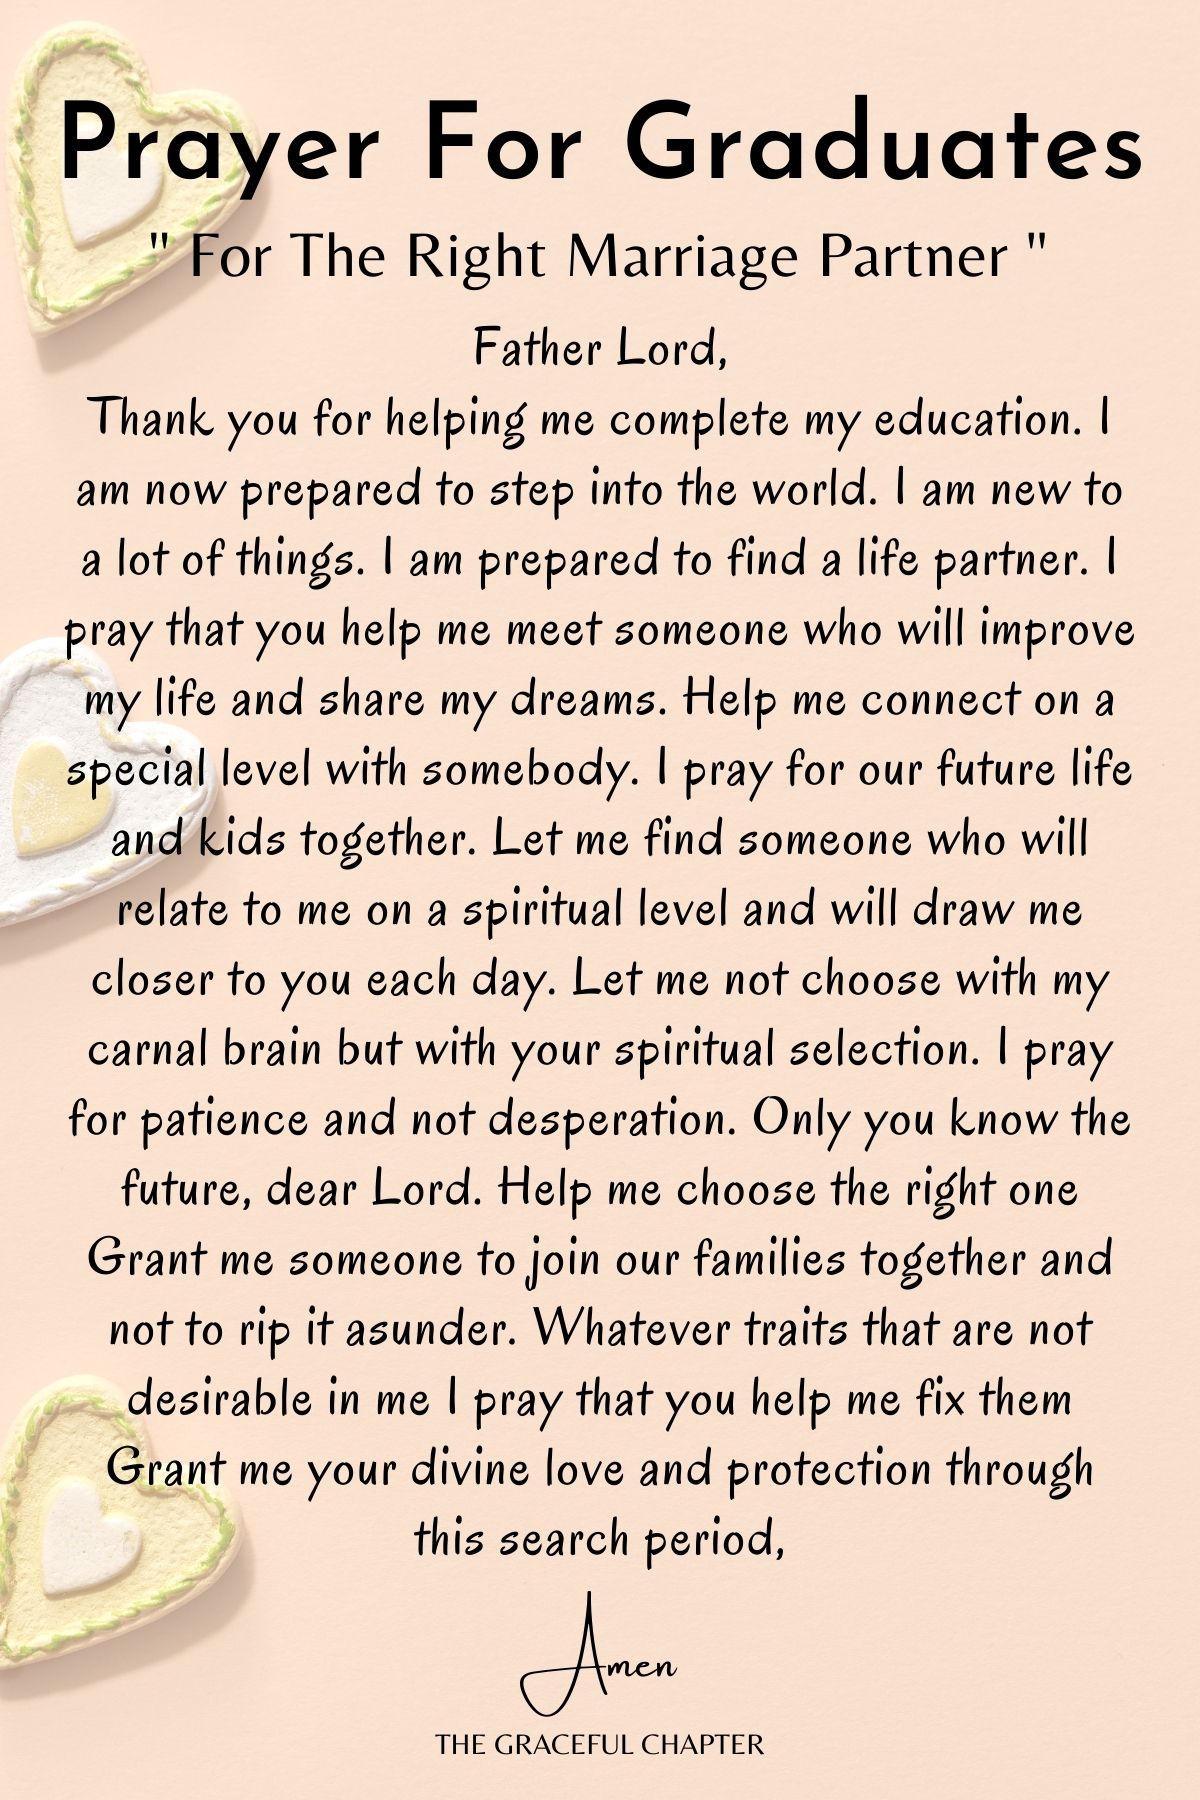 Prayer for the Right Marriage Partner - Prayers for Graduates